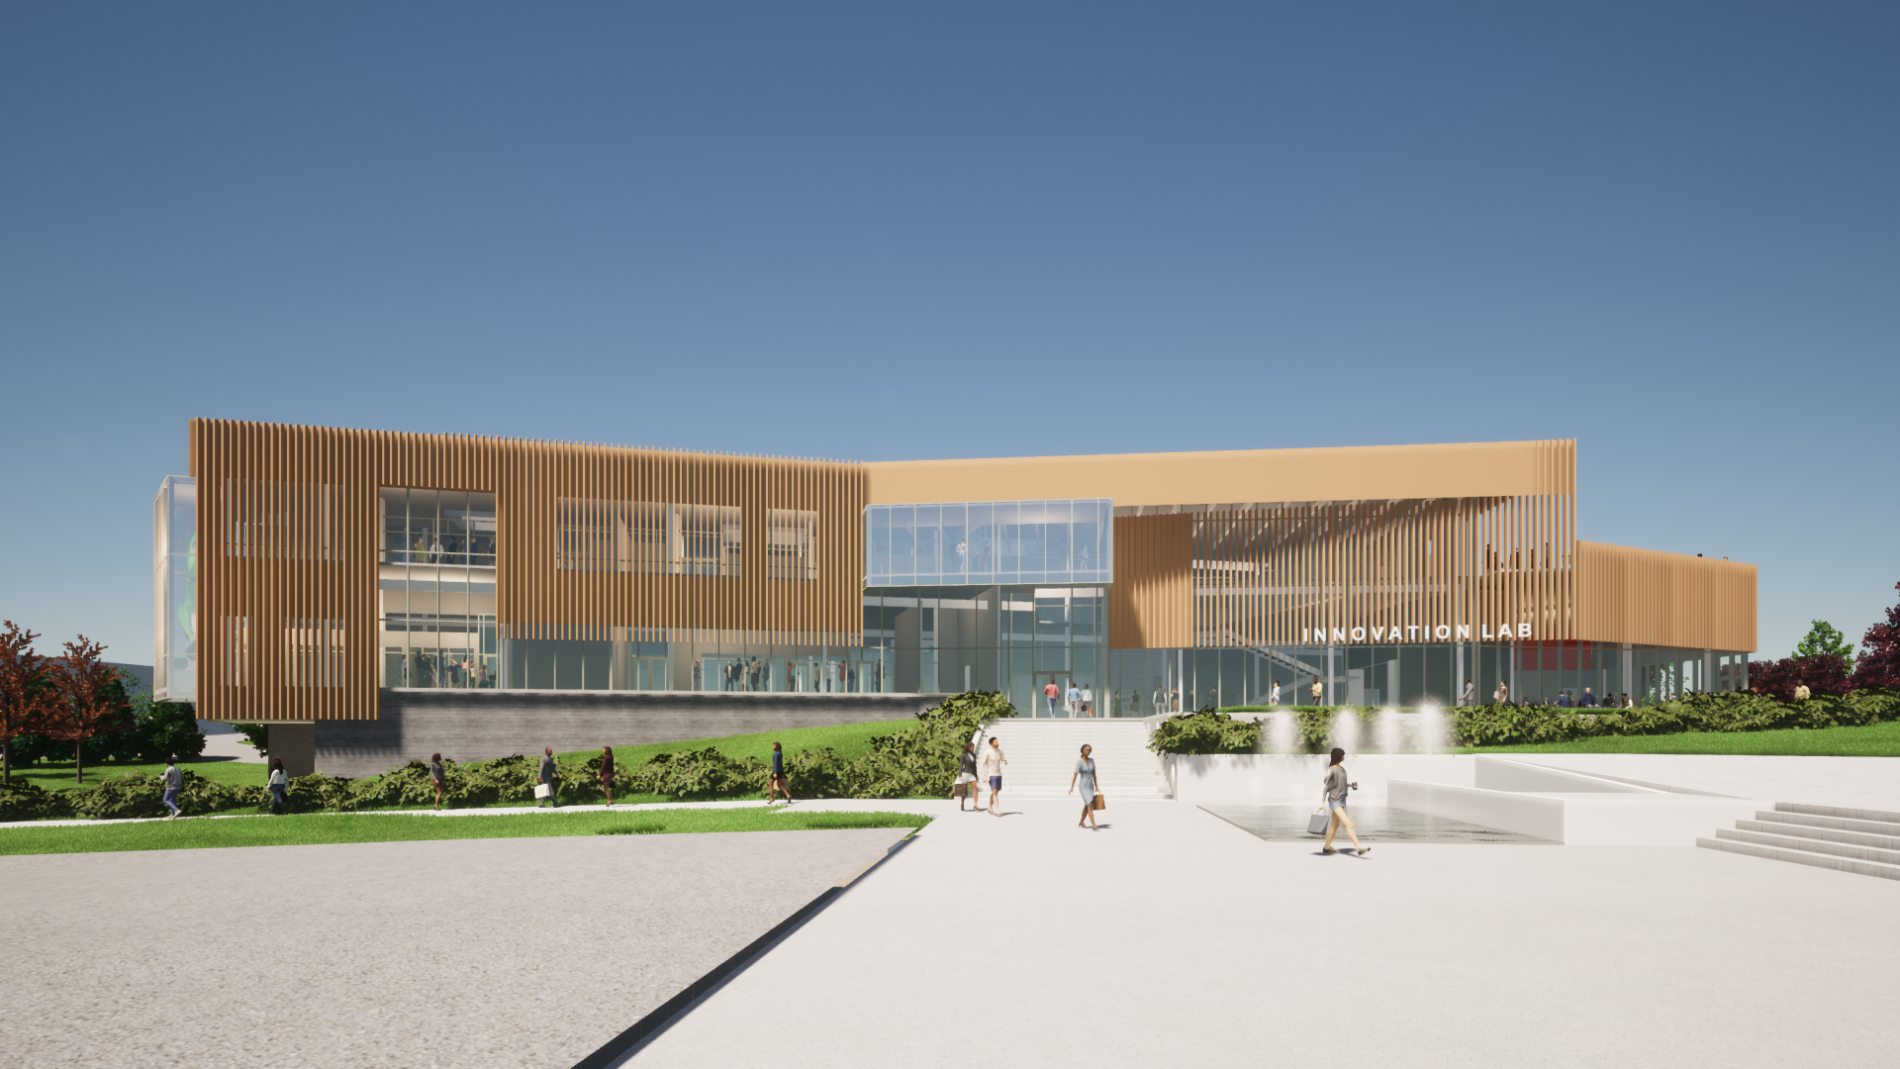 Exterior rendering of the Missouri S&T Student Experience Center being built by McCownGordon